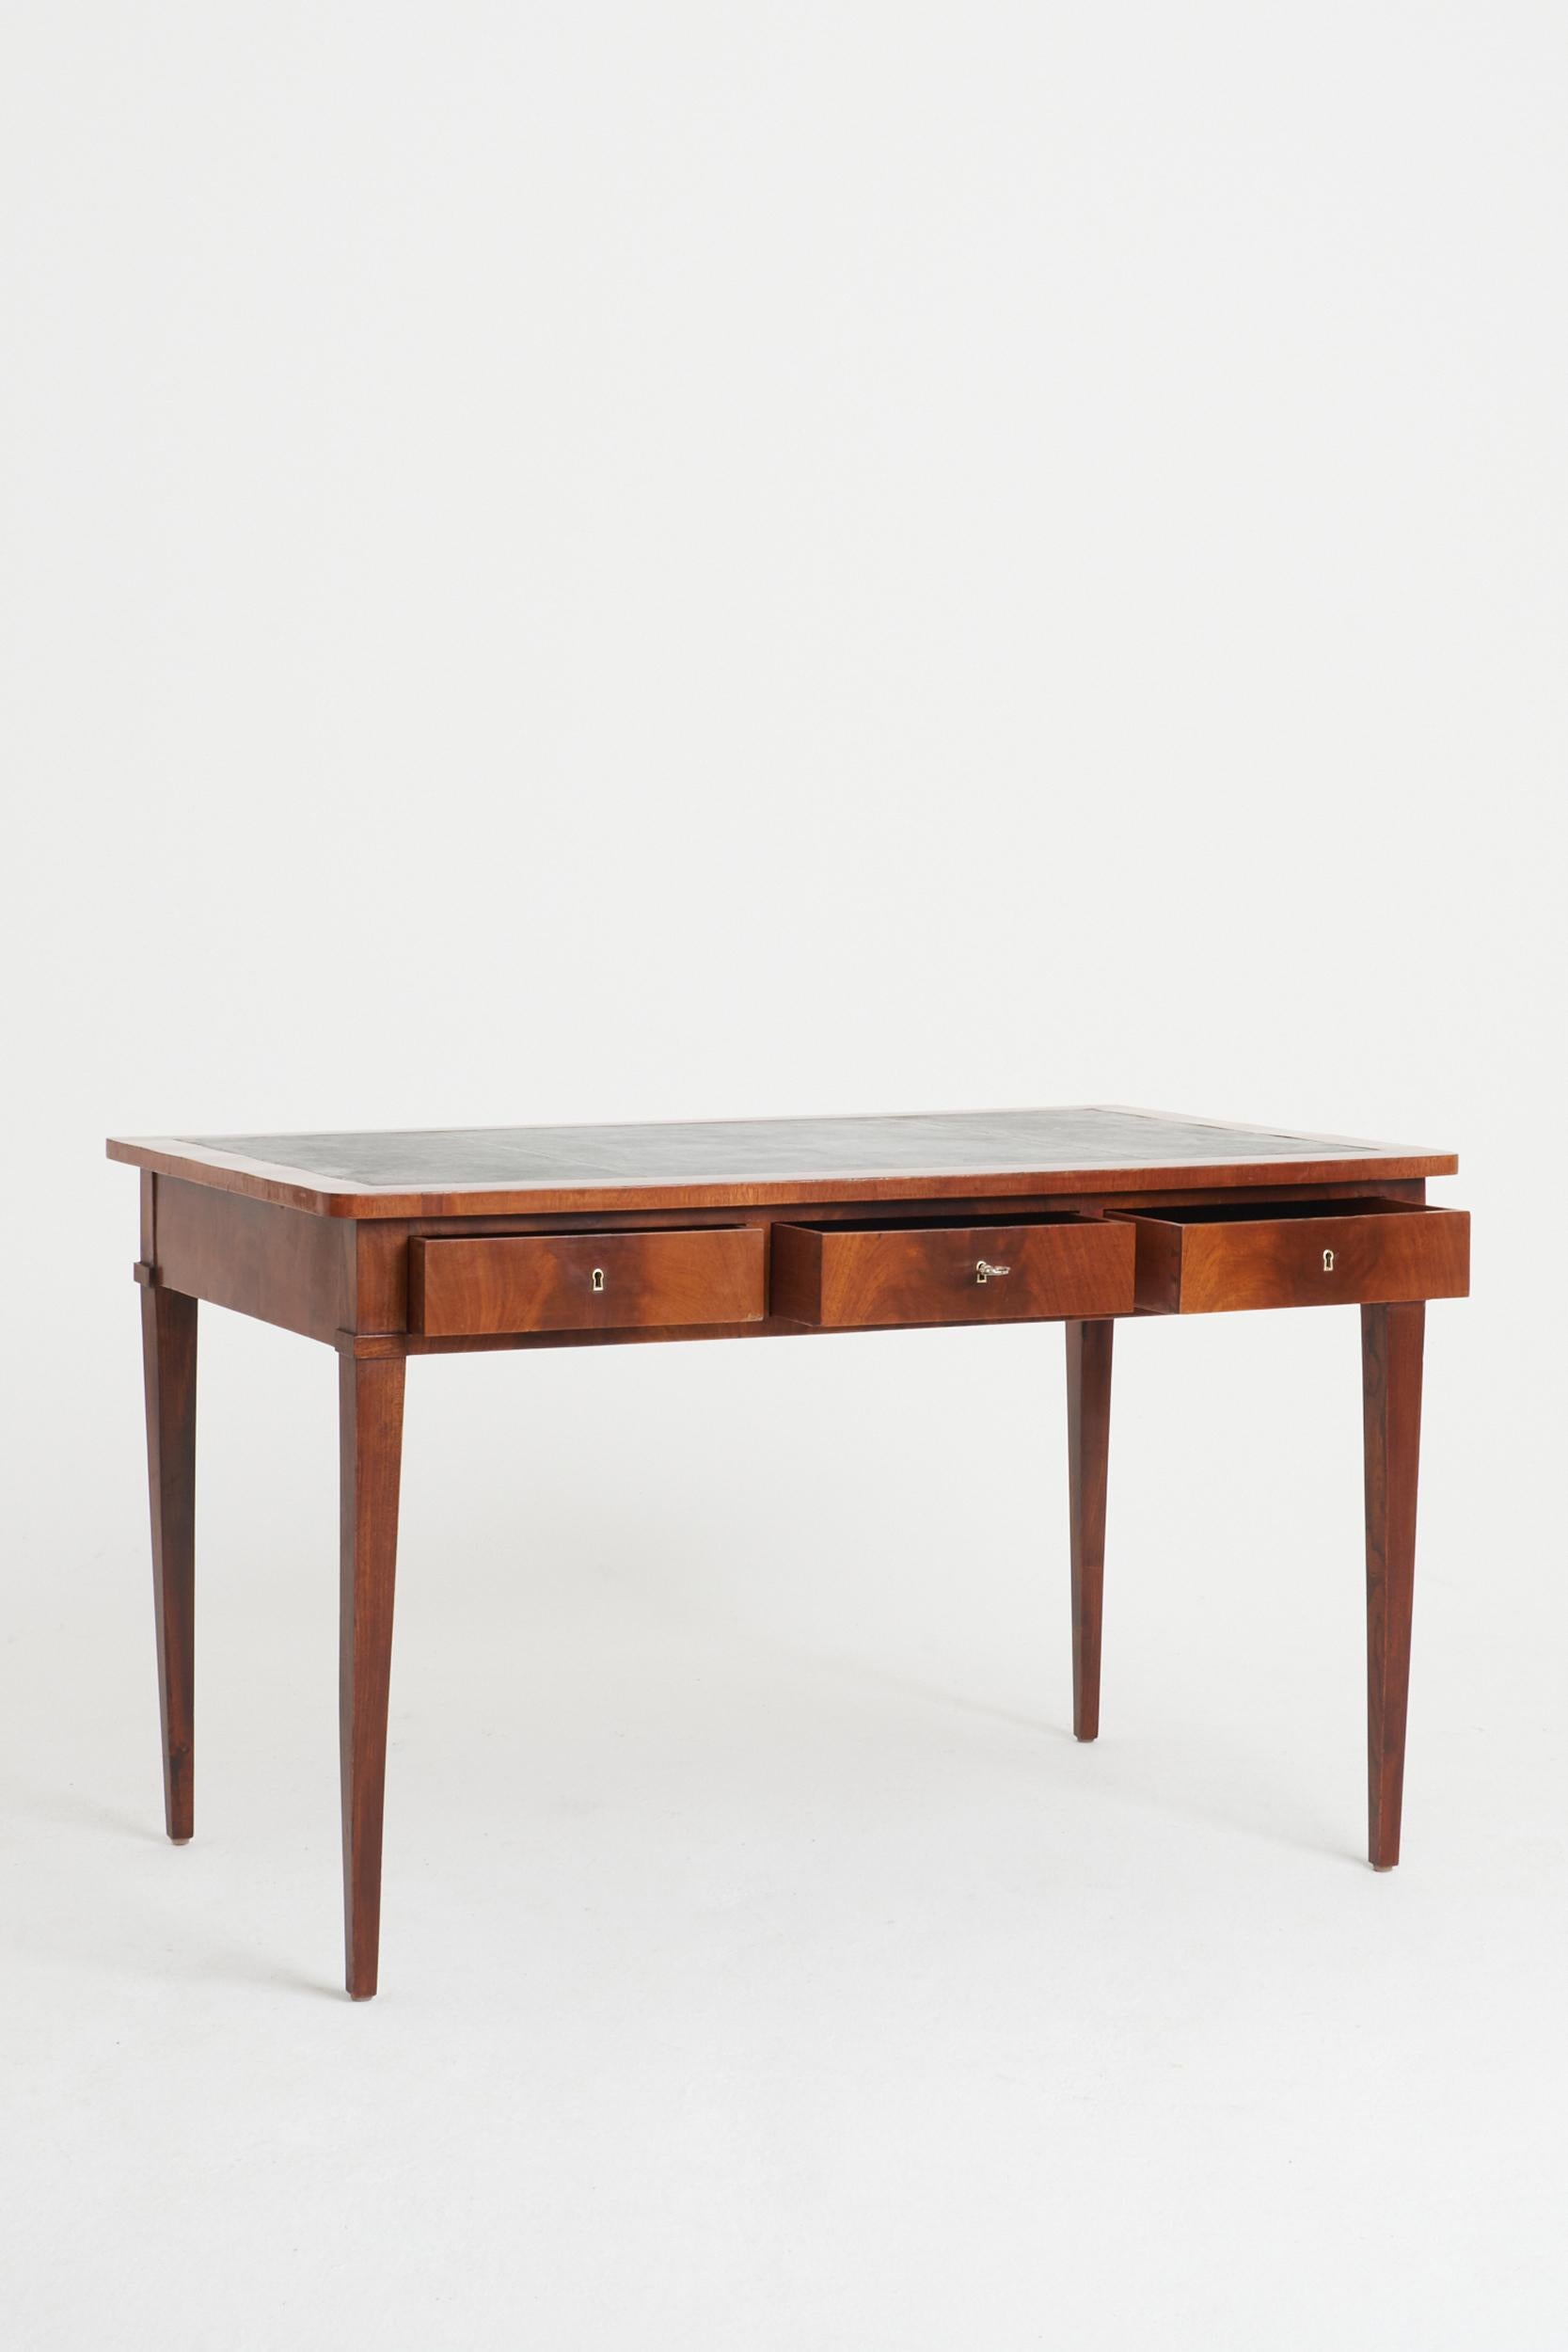 19th Century Neoclassical Mahogany Leather Top Desk